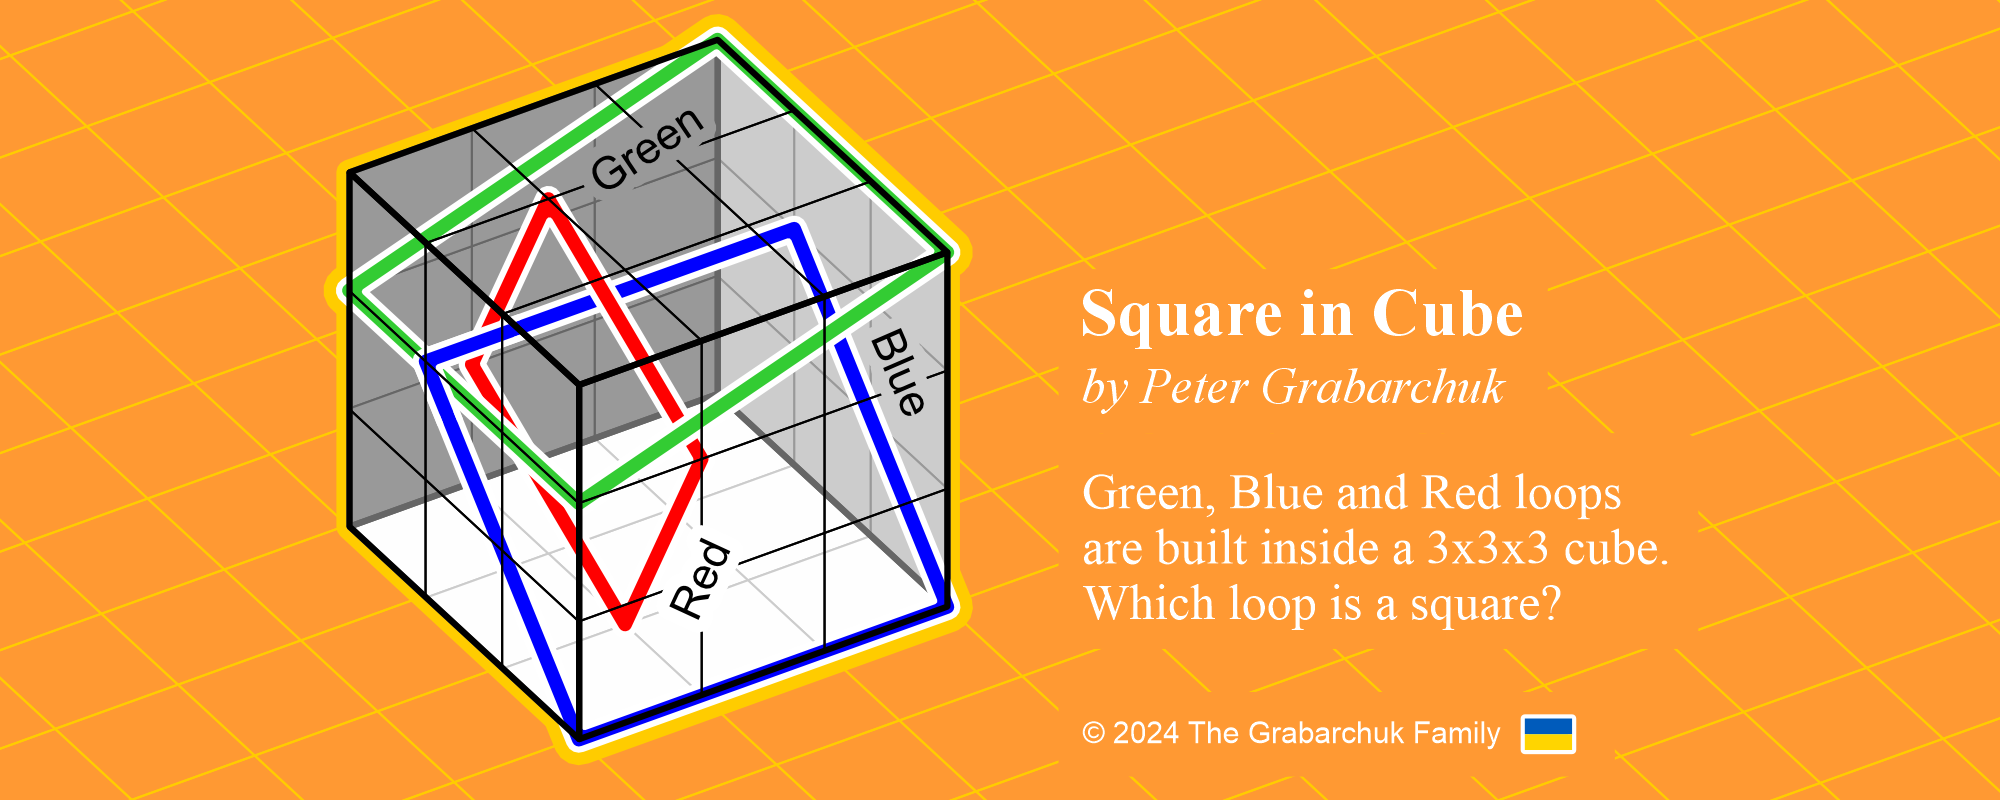 Square in Cube by Peter Grabarchuk